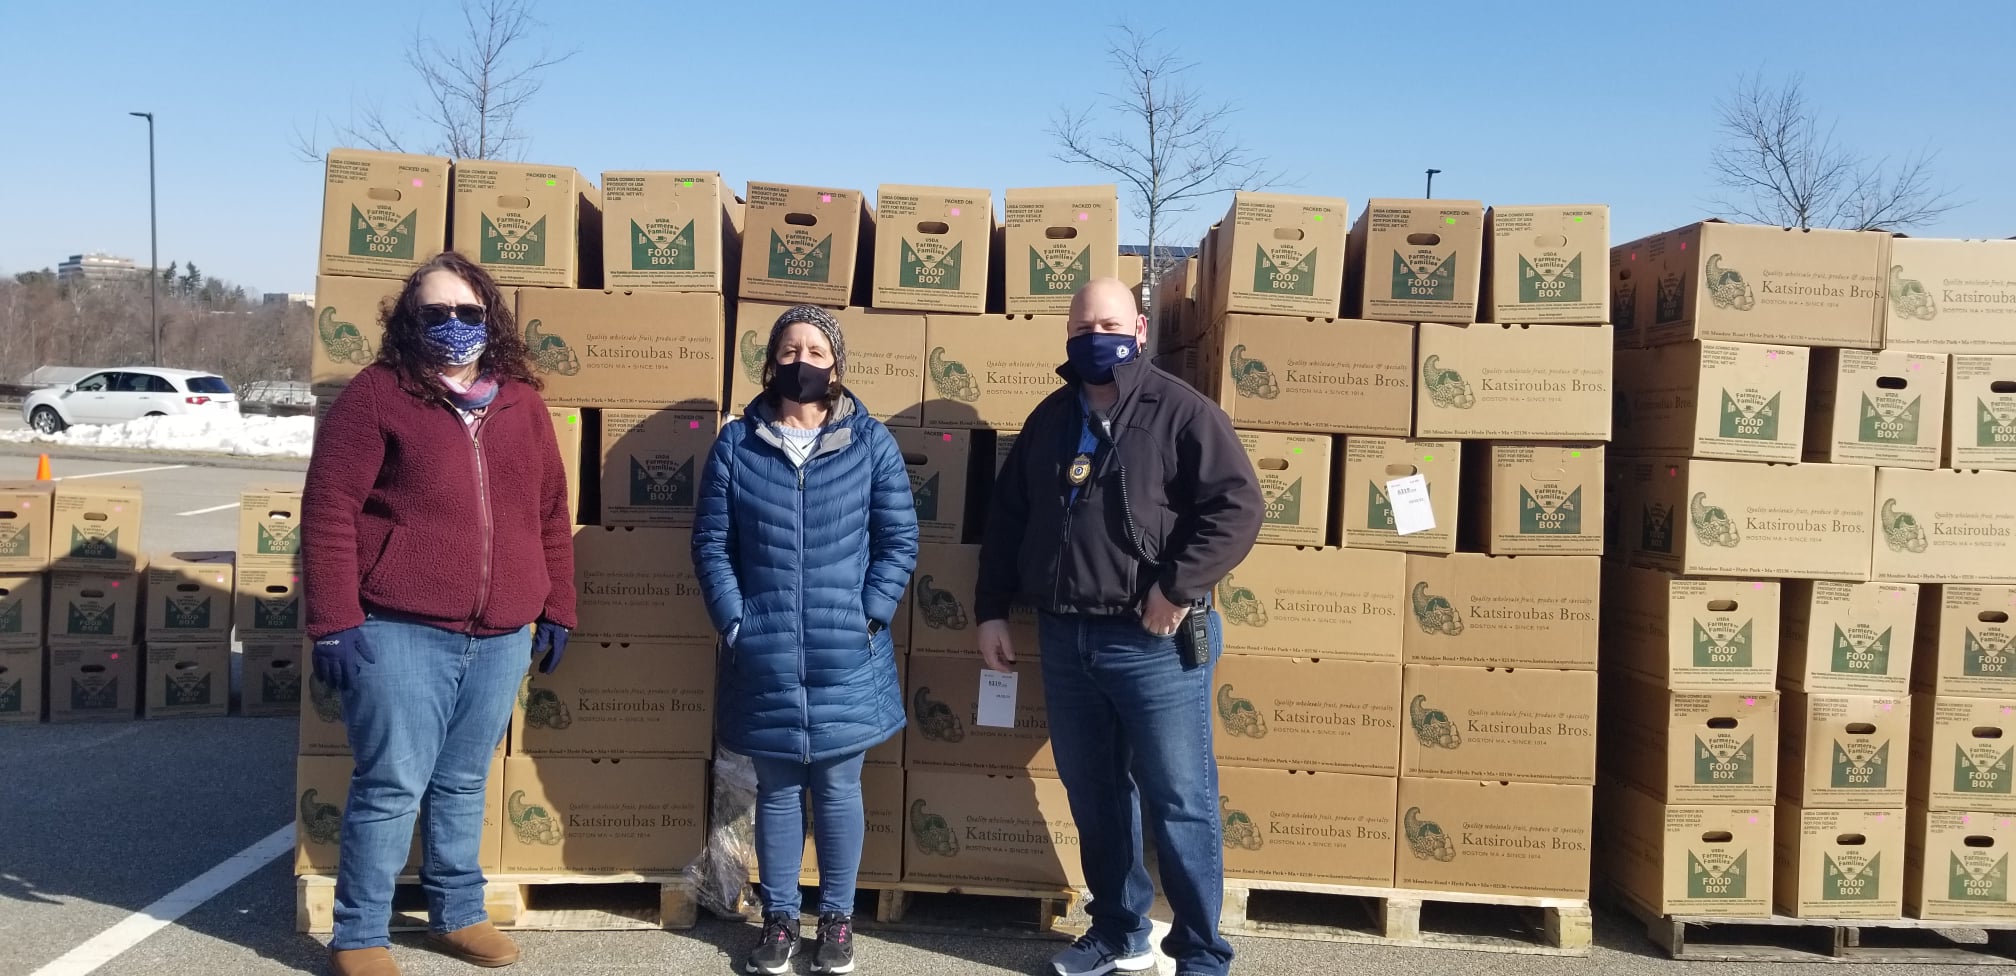 3 people standing in front of stack of food boxes